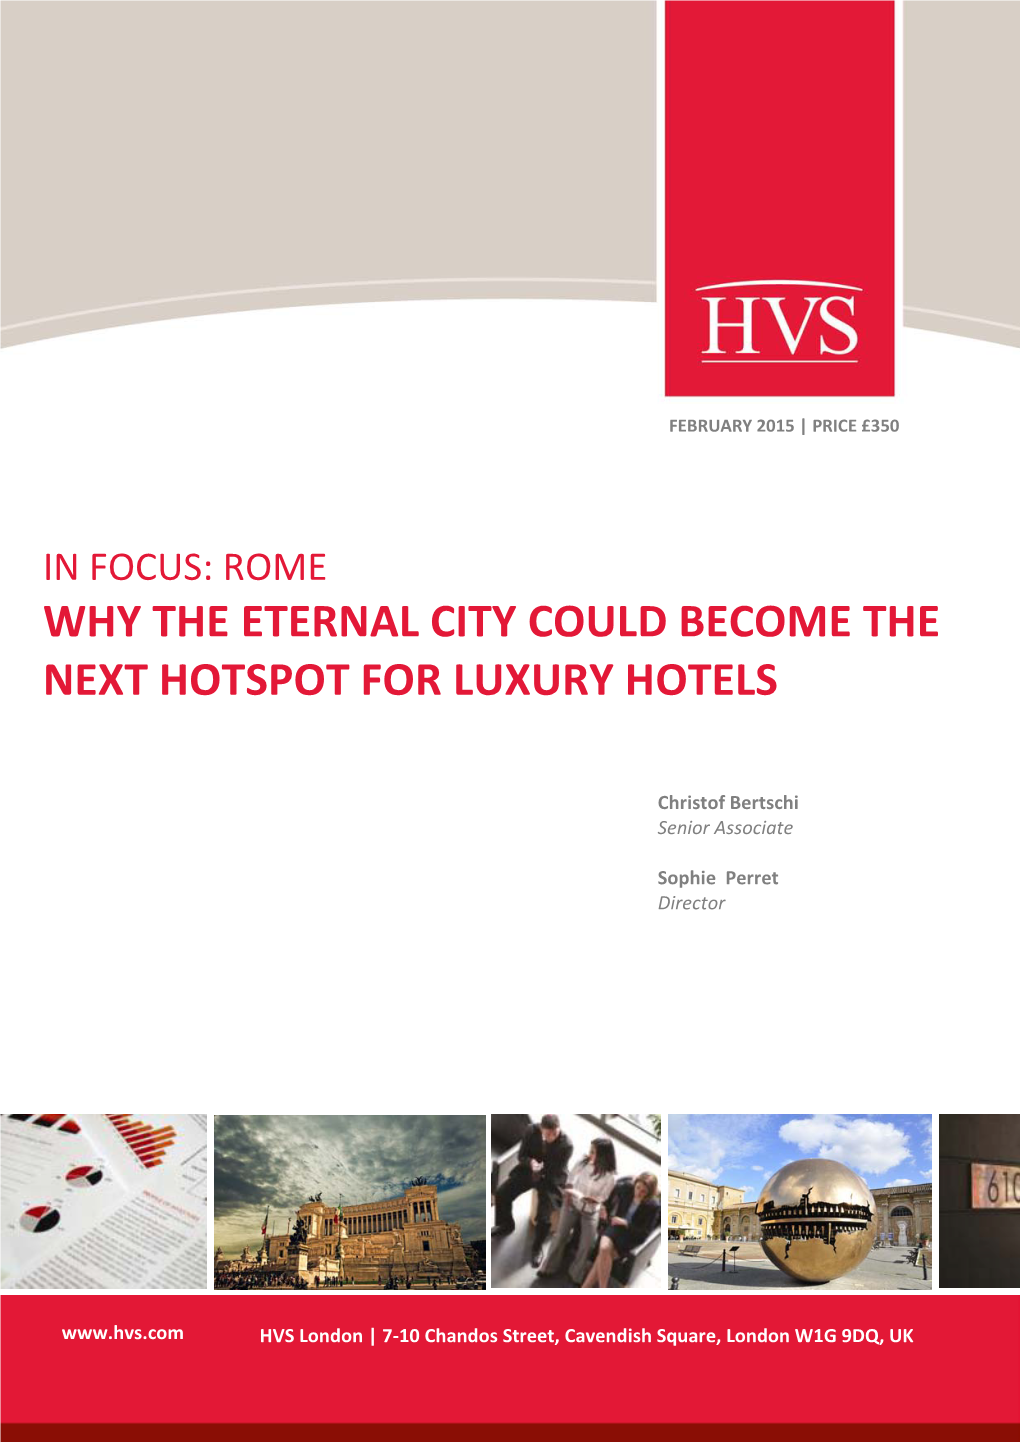 Why the Eternal City Could Become the Next Hotspot for Luxury Hotels